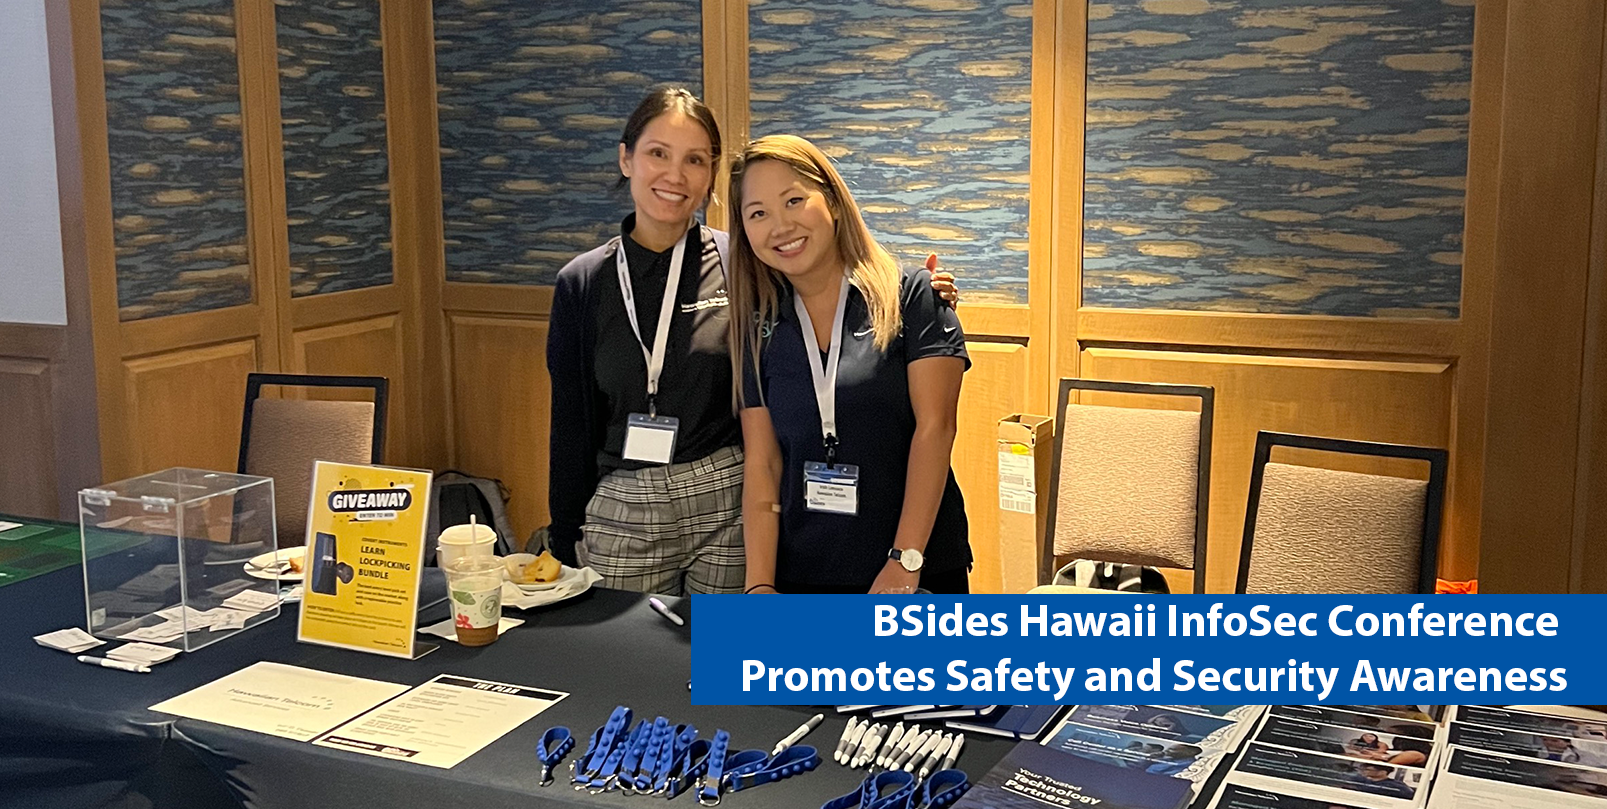 BSides Hawaii InfoSec Conference Promotes Safety and Security Awareness